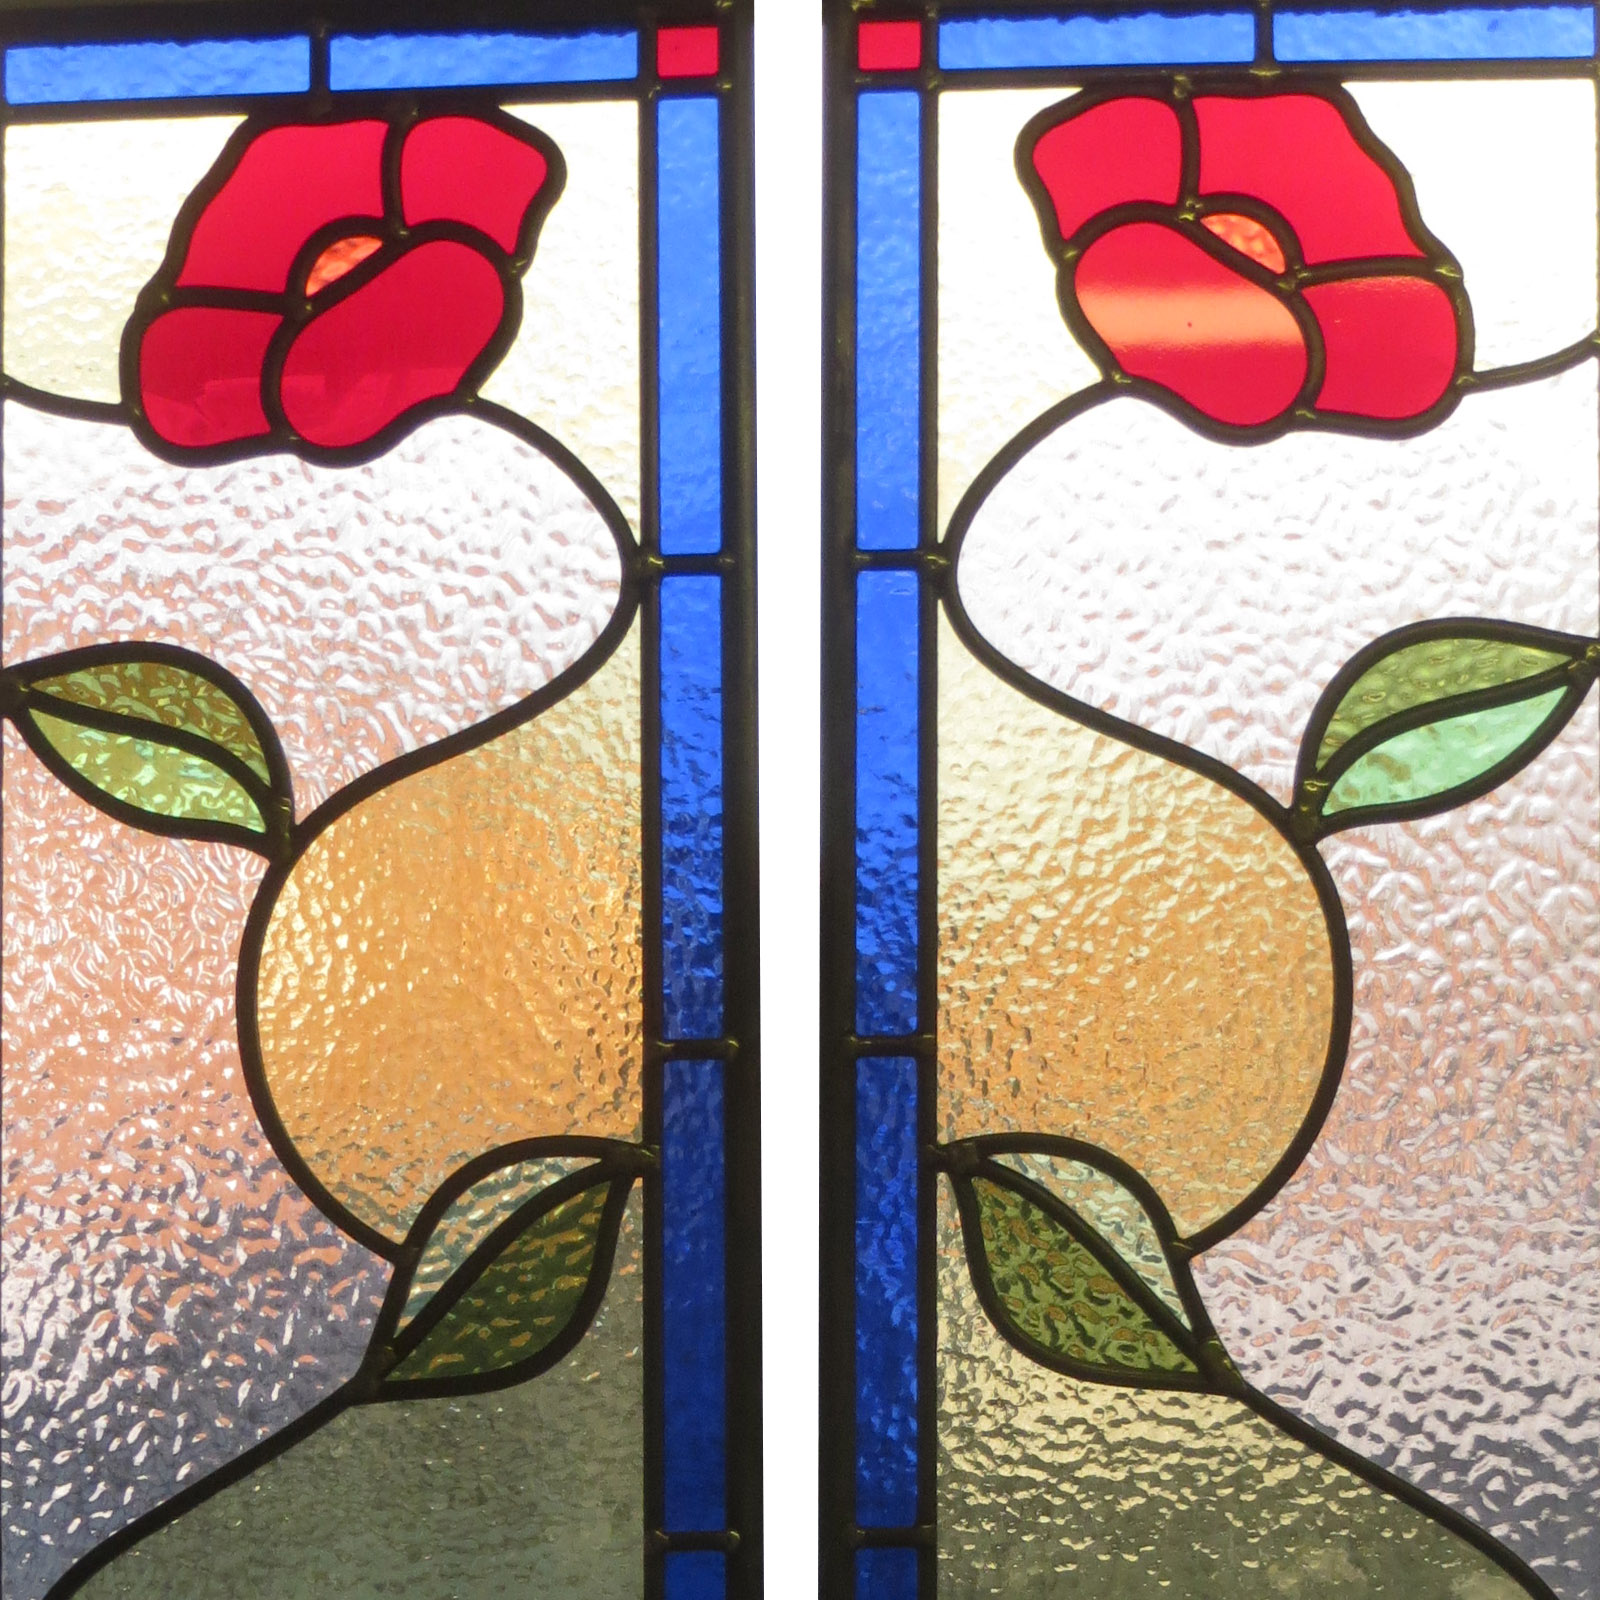 Traditional Simple Stained Glass Panel